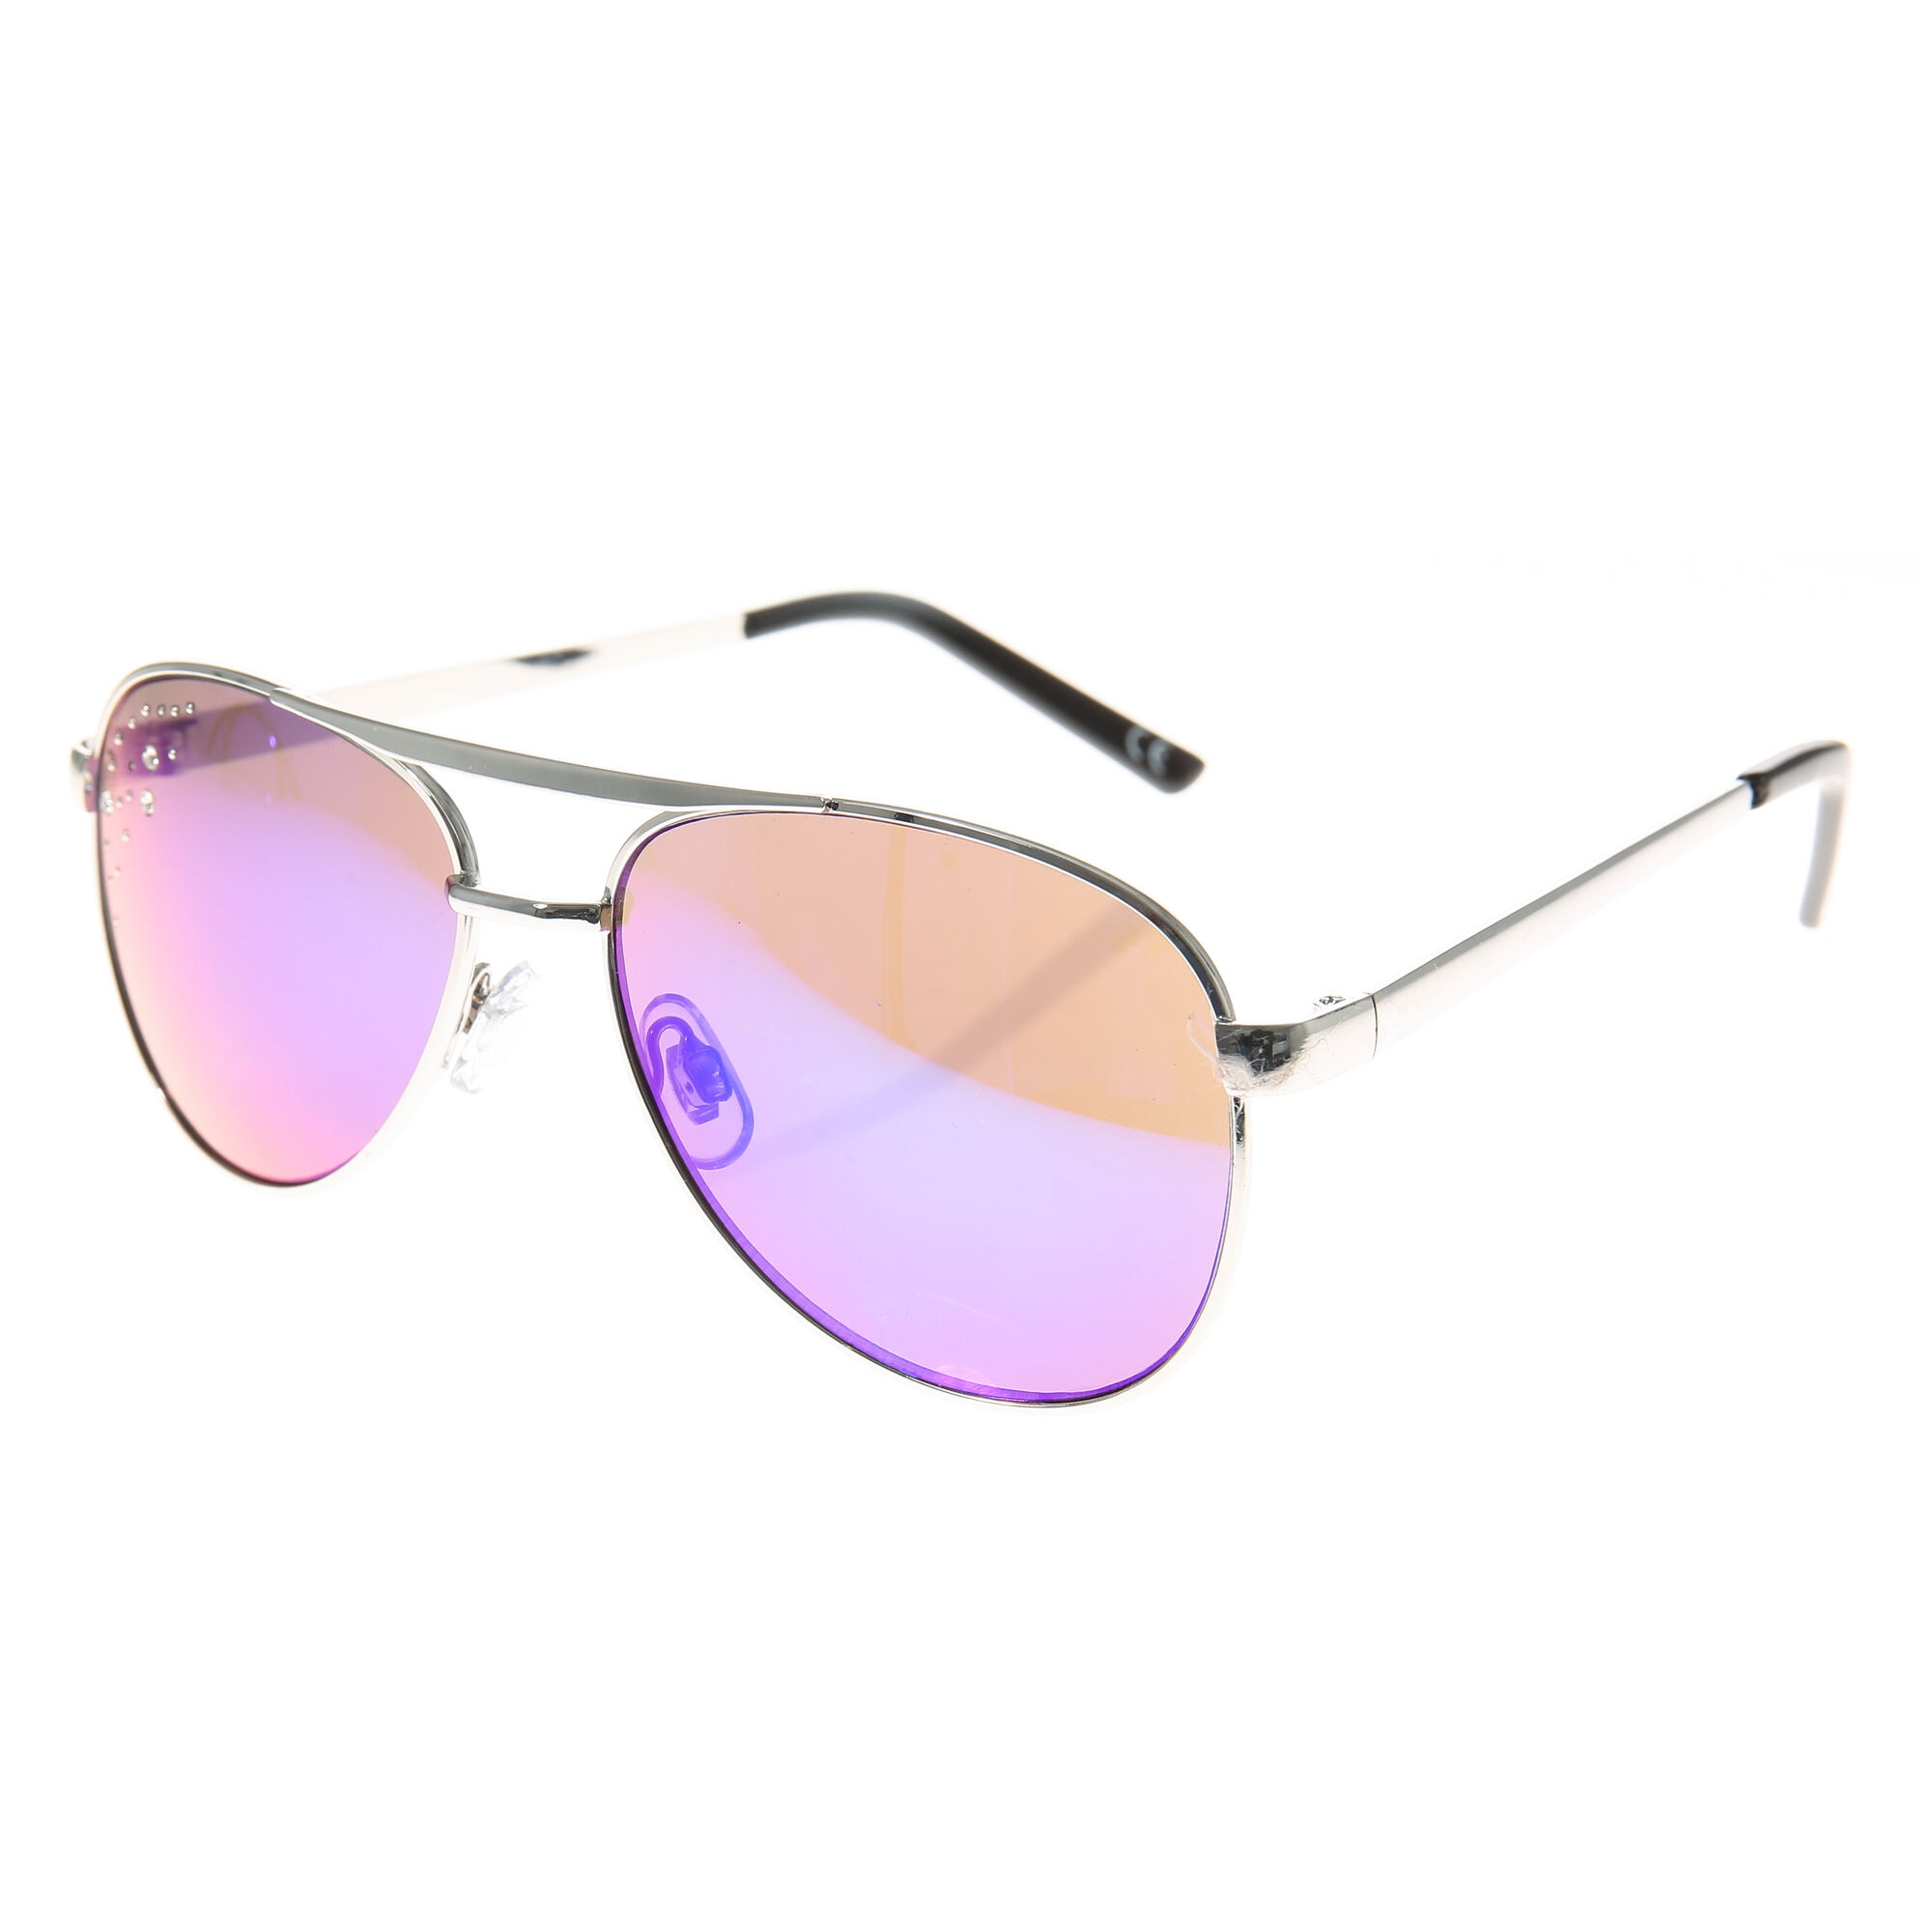 View Claires Club Glitter Aviator Sunglasses Silver information